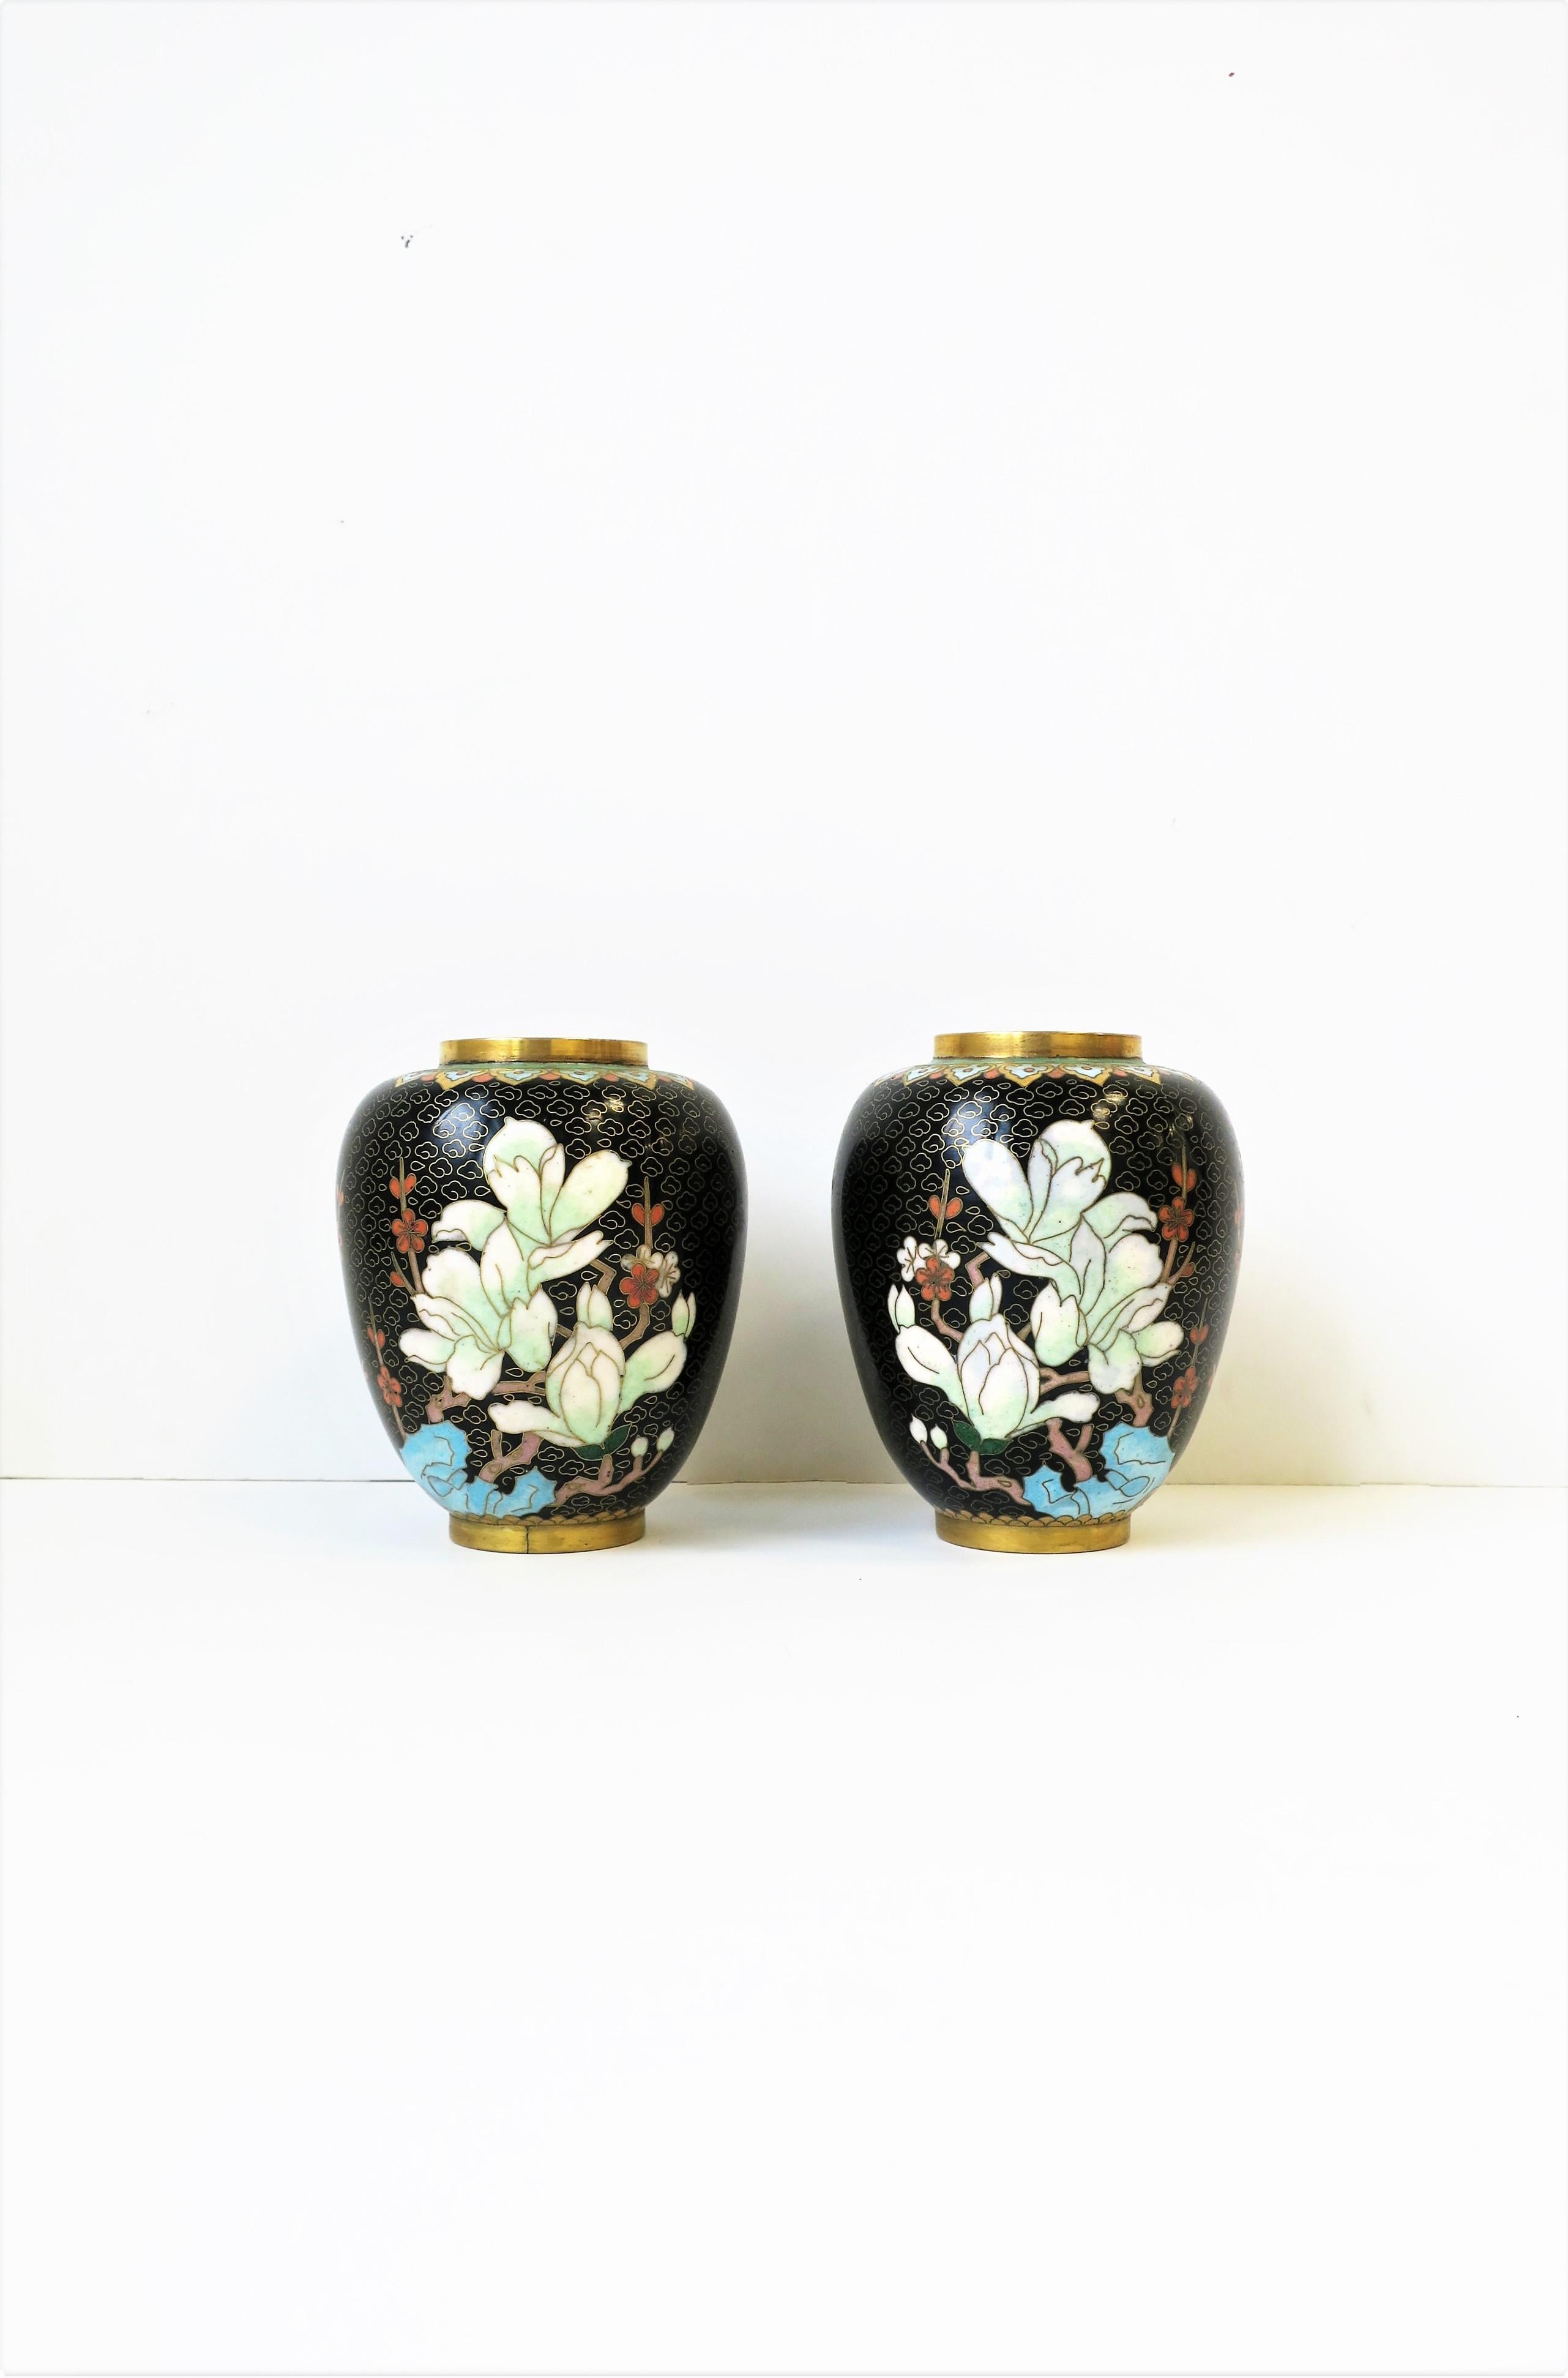 A very beautiful pair of vintage Asian black and pastel color enamel cloisonné´ and brass vases, circa 20th century, Asia. Beautiful, detailed design of flowers; Larger flowers on front, smaller cherry blossoms on sides, and spider chrysanthemums on